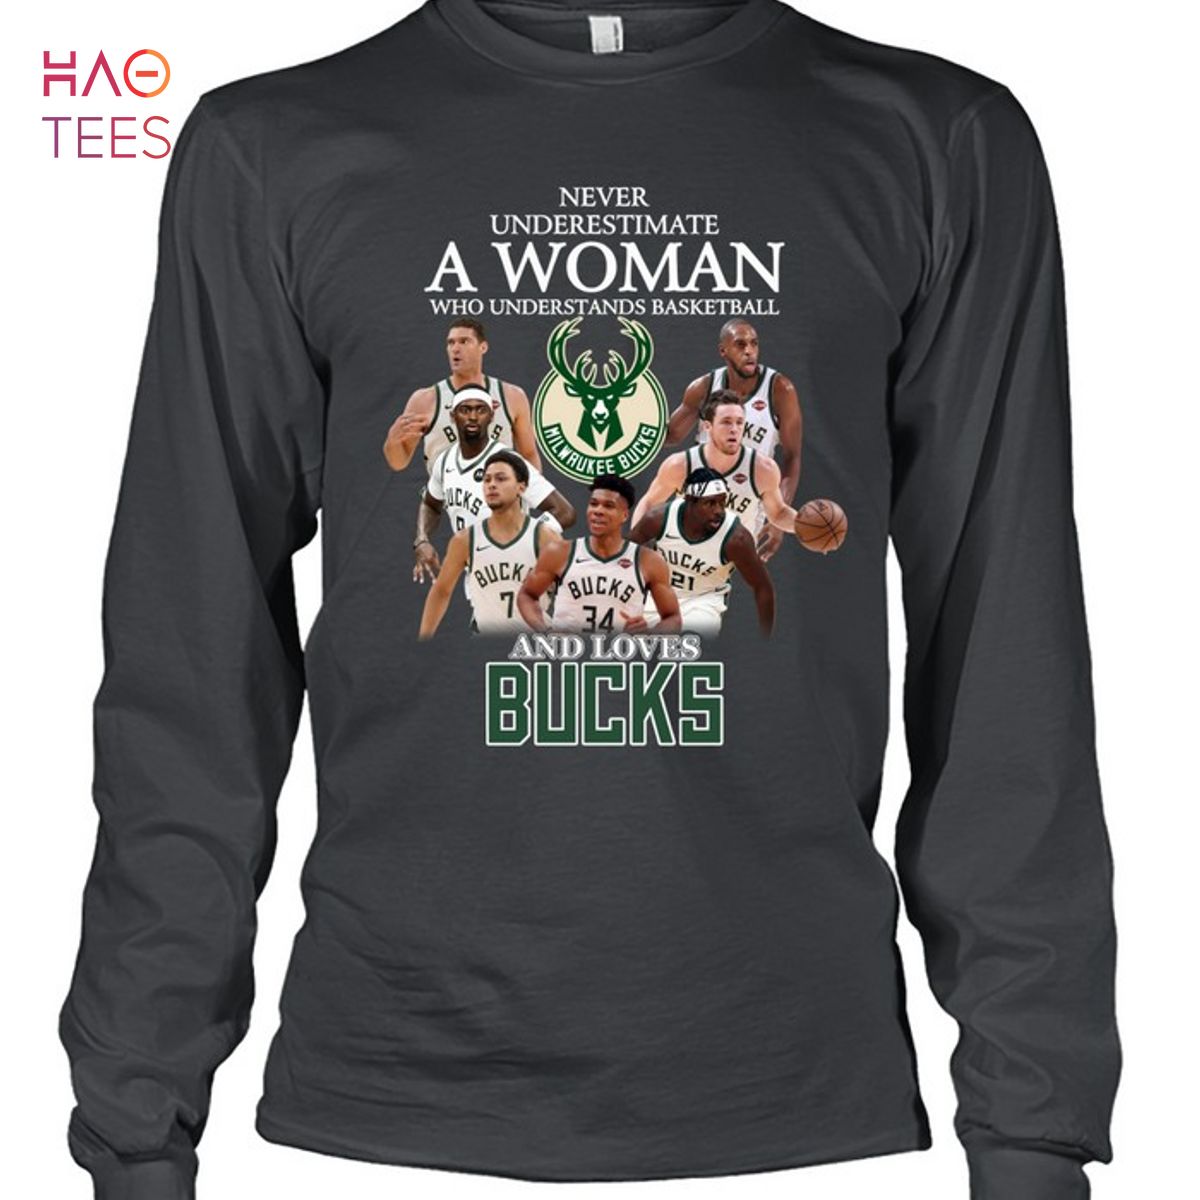 Never Underestimate A Woman Who Understands Basketball And Loves Bucks Hot T-Shirt